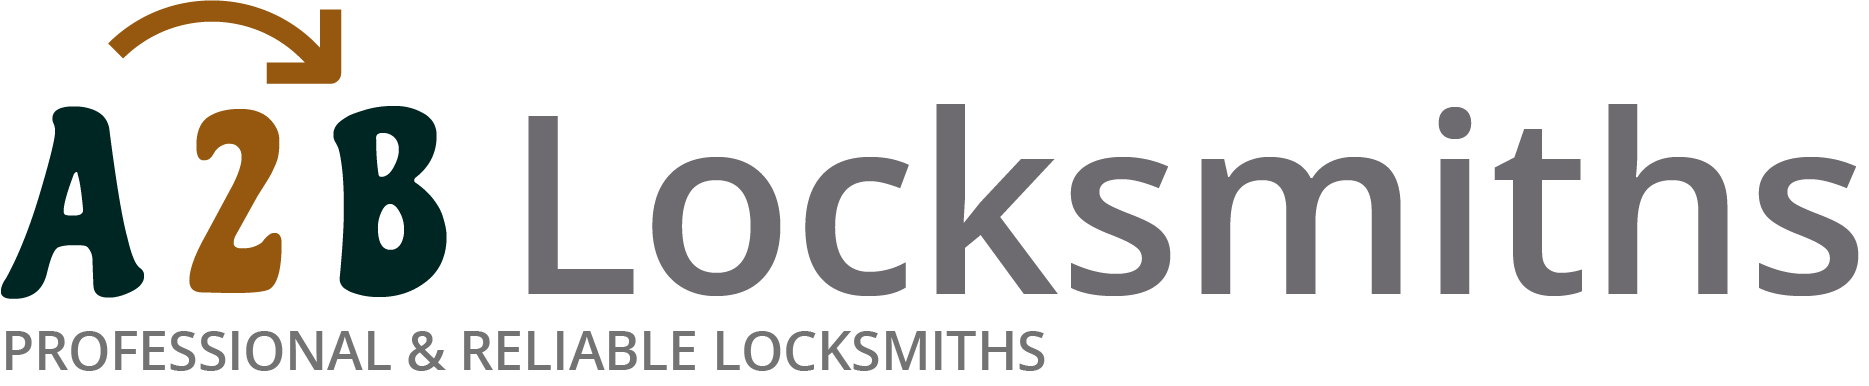 If you are locked out of house in Esher, our 24/7 local emergency locksmith services can help you.